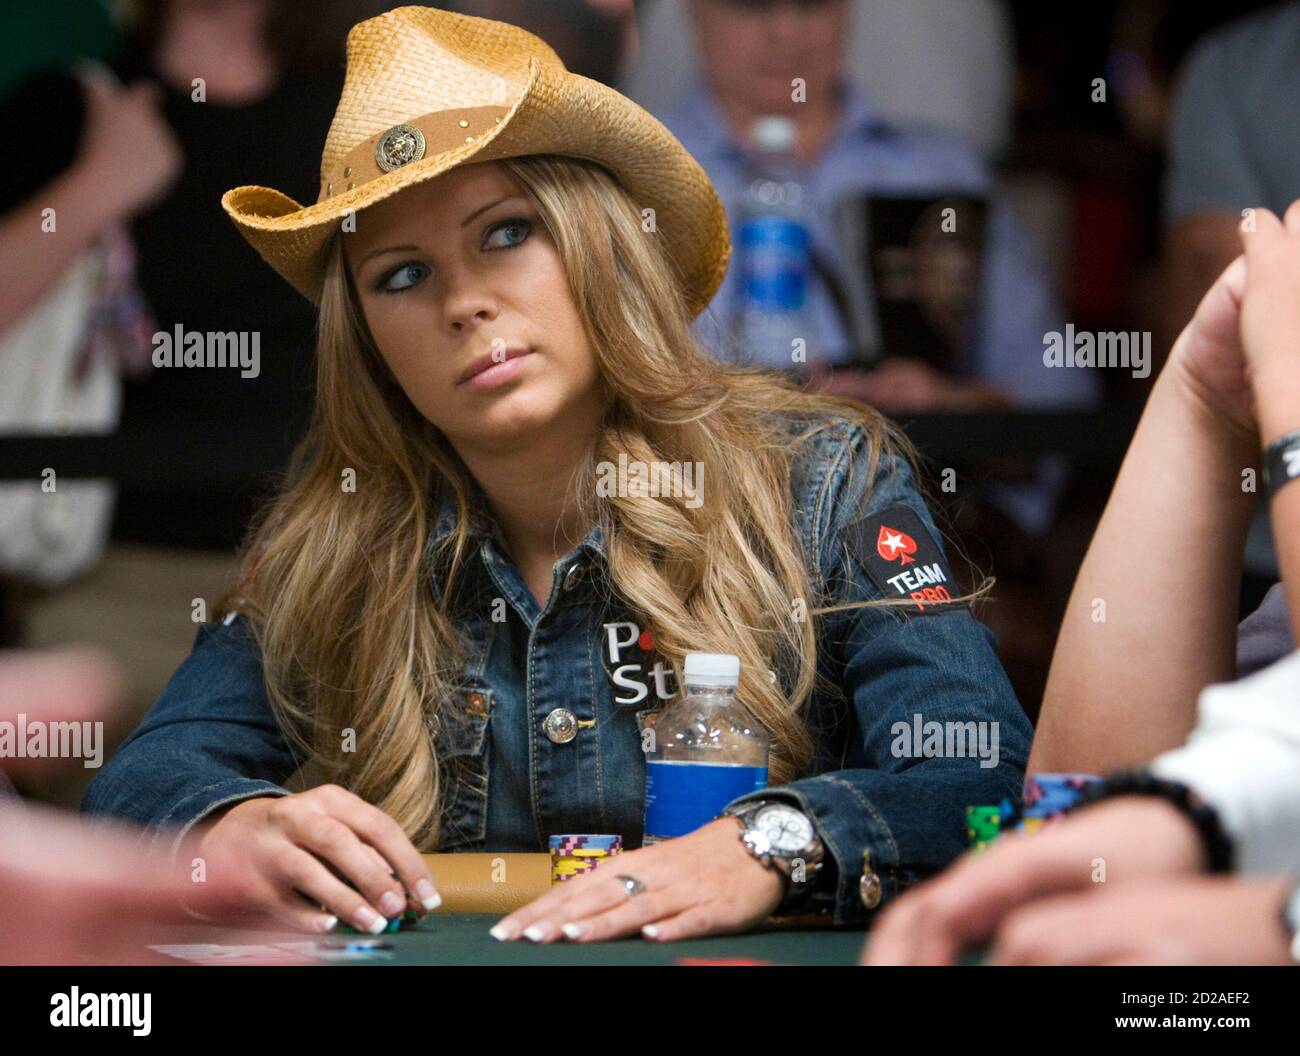 German poker professional Sandra Naujoks competes during the first day of the 41st annual World Series of Poker no-limit Texas Hold 'em main event at the Rio hotel-casino in Las Vegas, Nevada July 5, 2010. It is expected that 6,000 to 7,000 players will pay the $10,000 buy-in to enter the tournament, officials said.  REUTERS/Las Vegas Sun/Steve Marcus (UNITED STATES - Tags: SOCIETY IMAGES OF THE DAY) Stock Photo